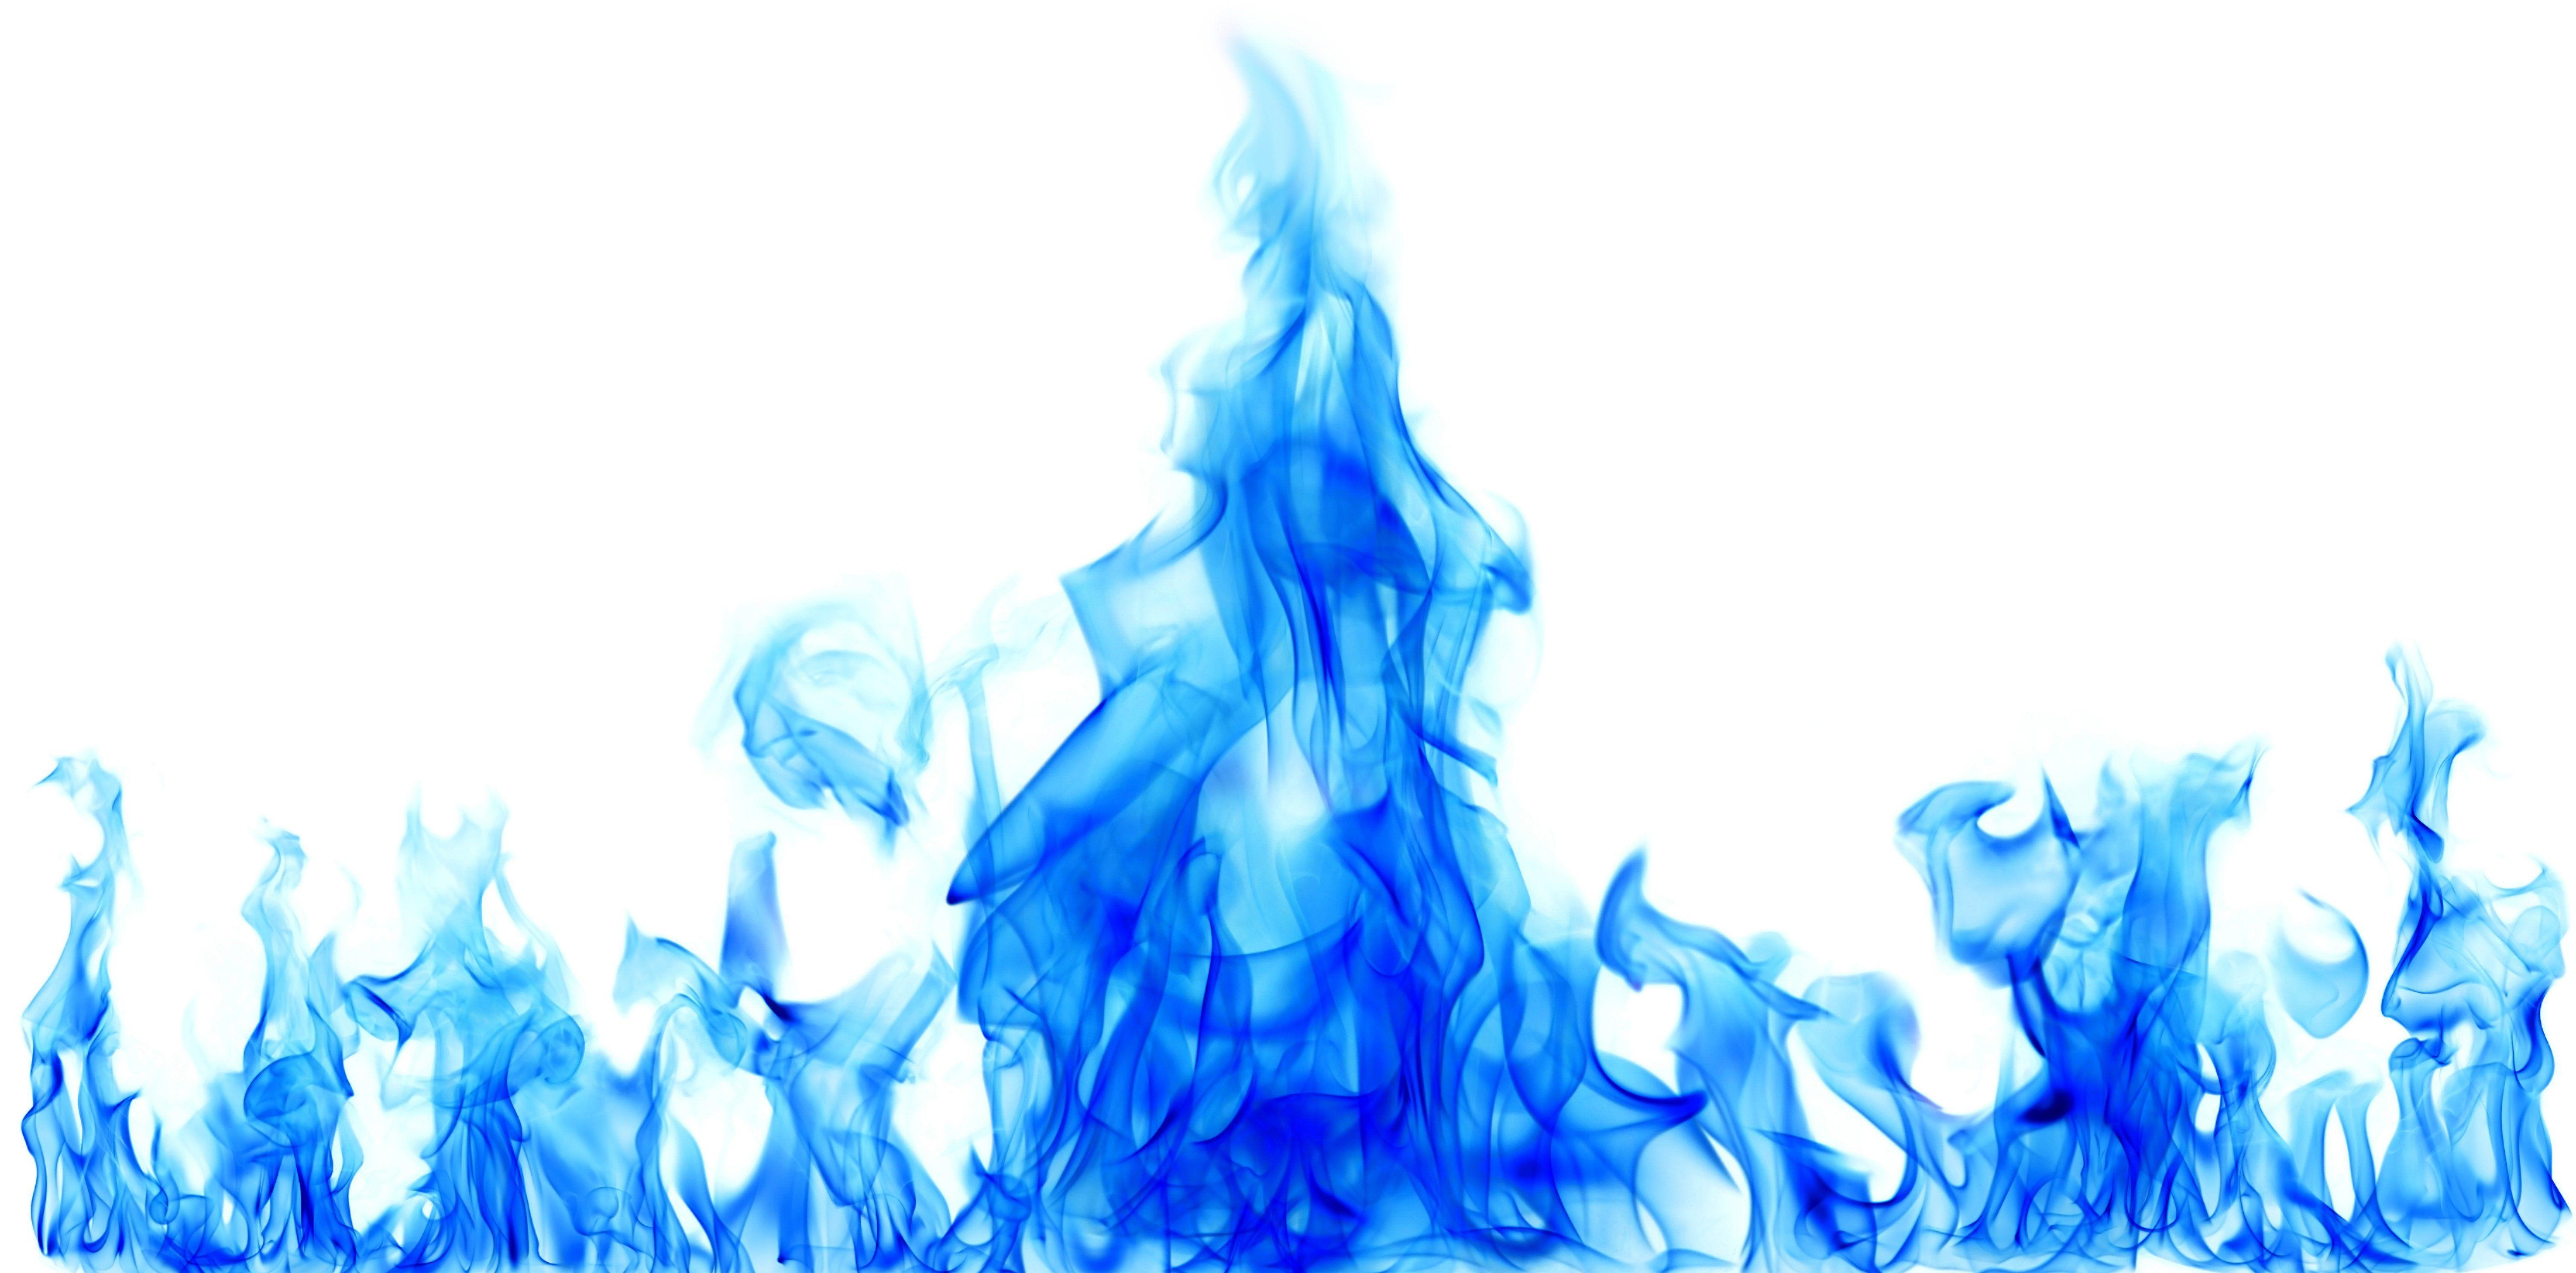 Blue flames png transparent Icon and PNG Background. Blue flames, Simple background image, Banner background image